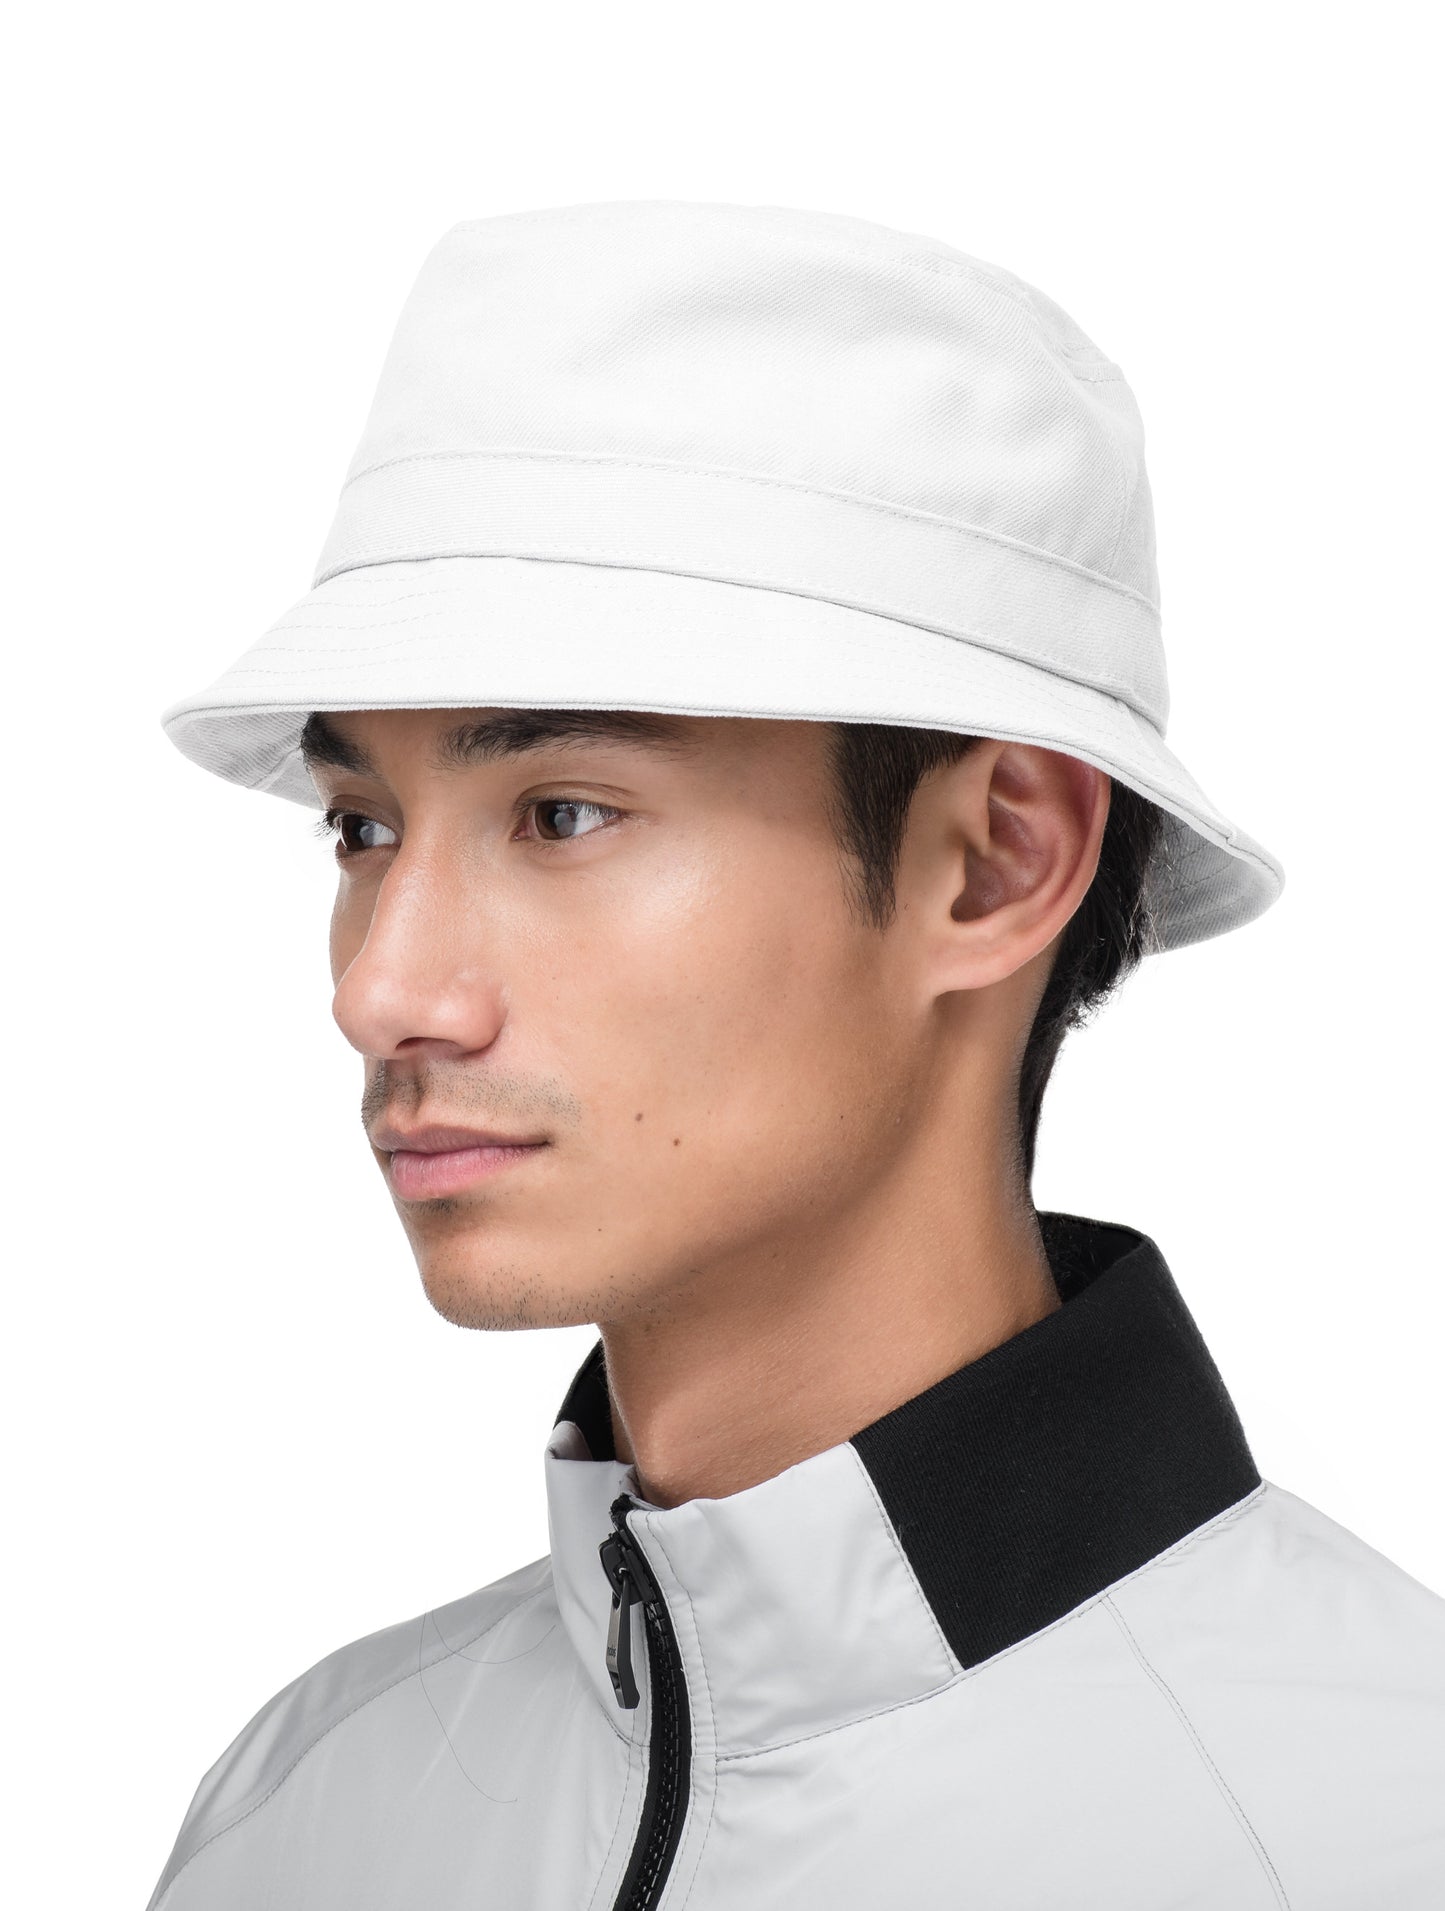 Unisex bucket hat with flat crown top and stitching detail on brim in Optic White